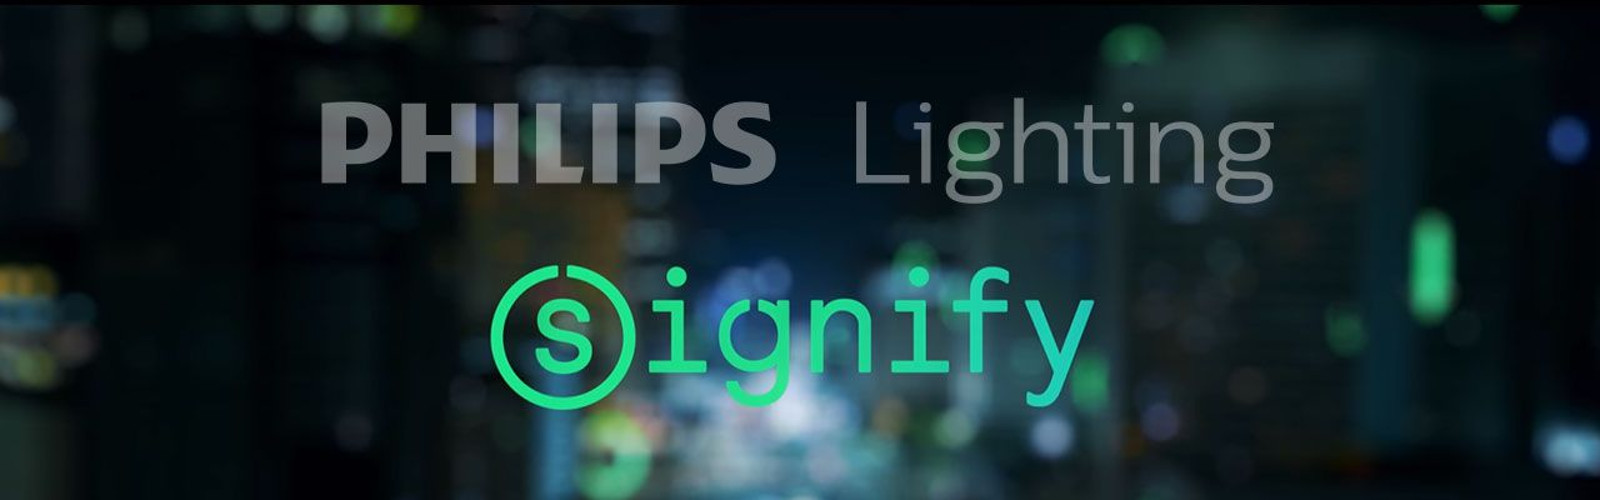 PHILIPS Signify